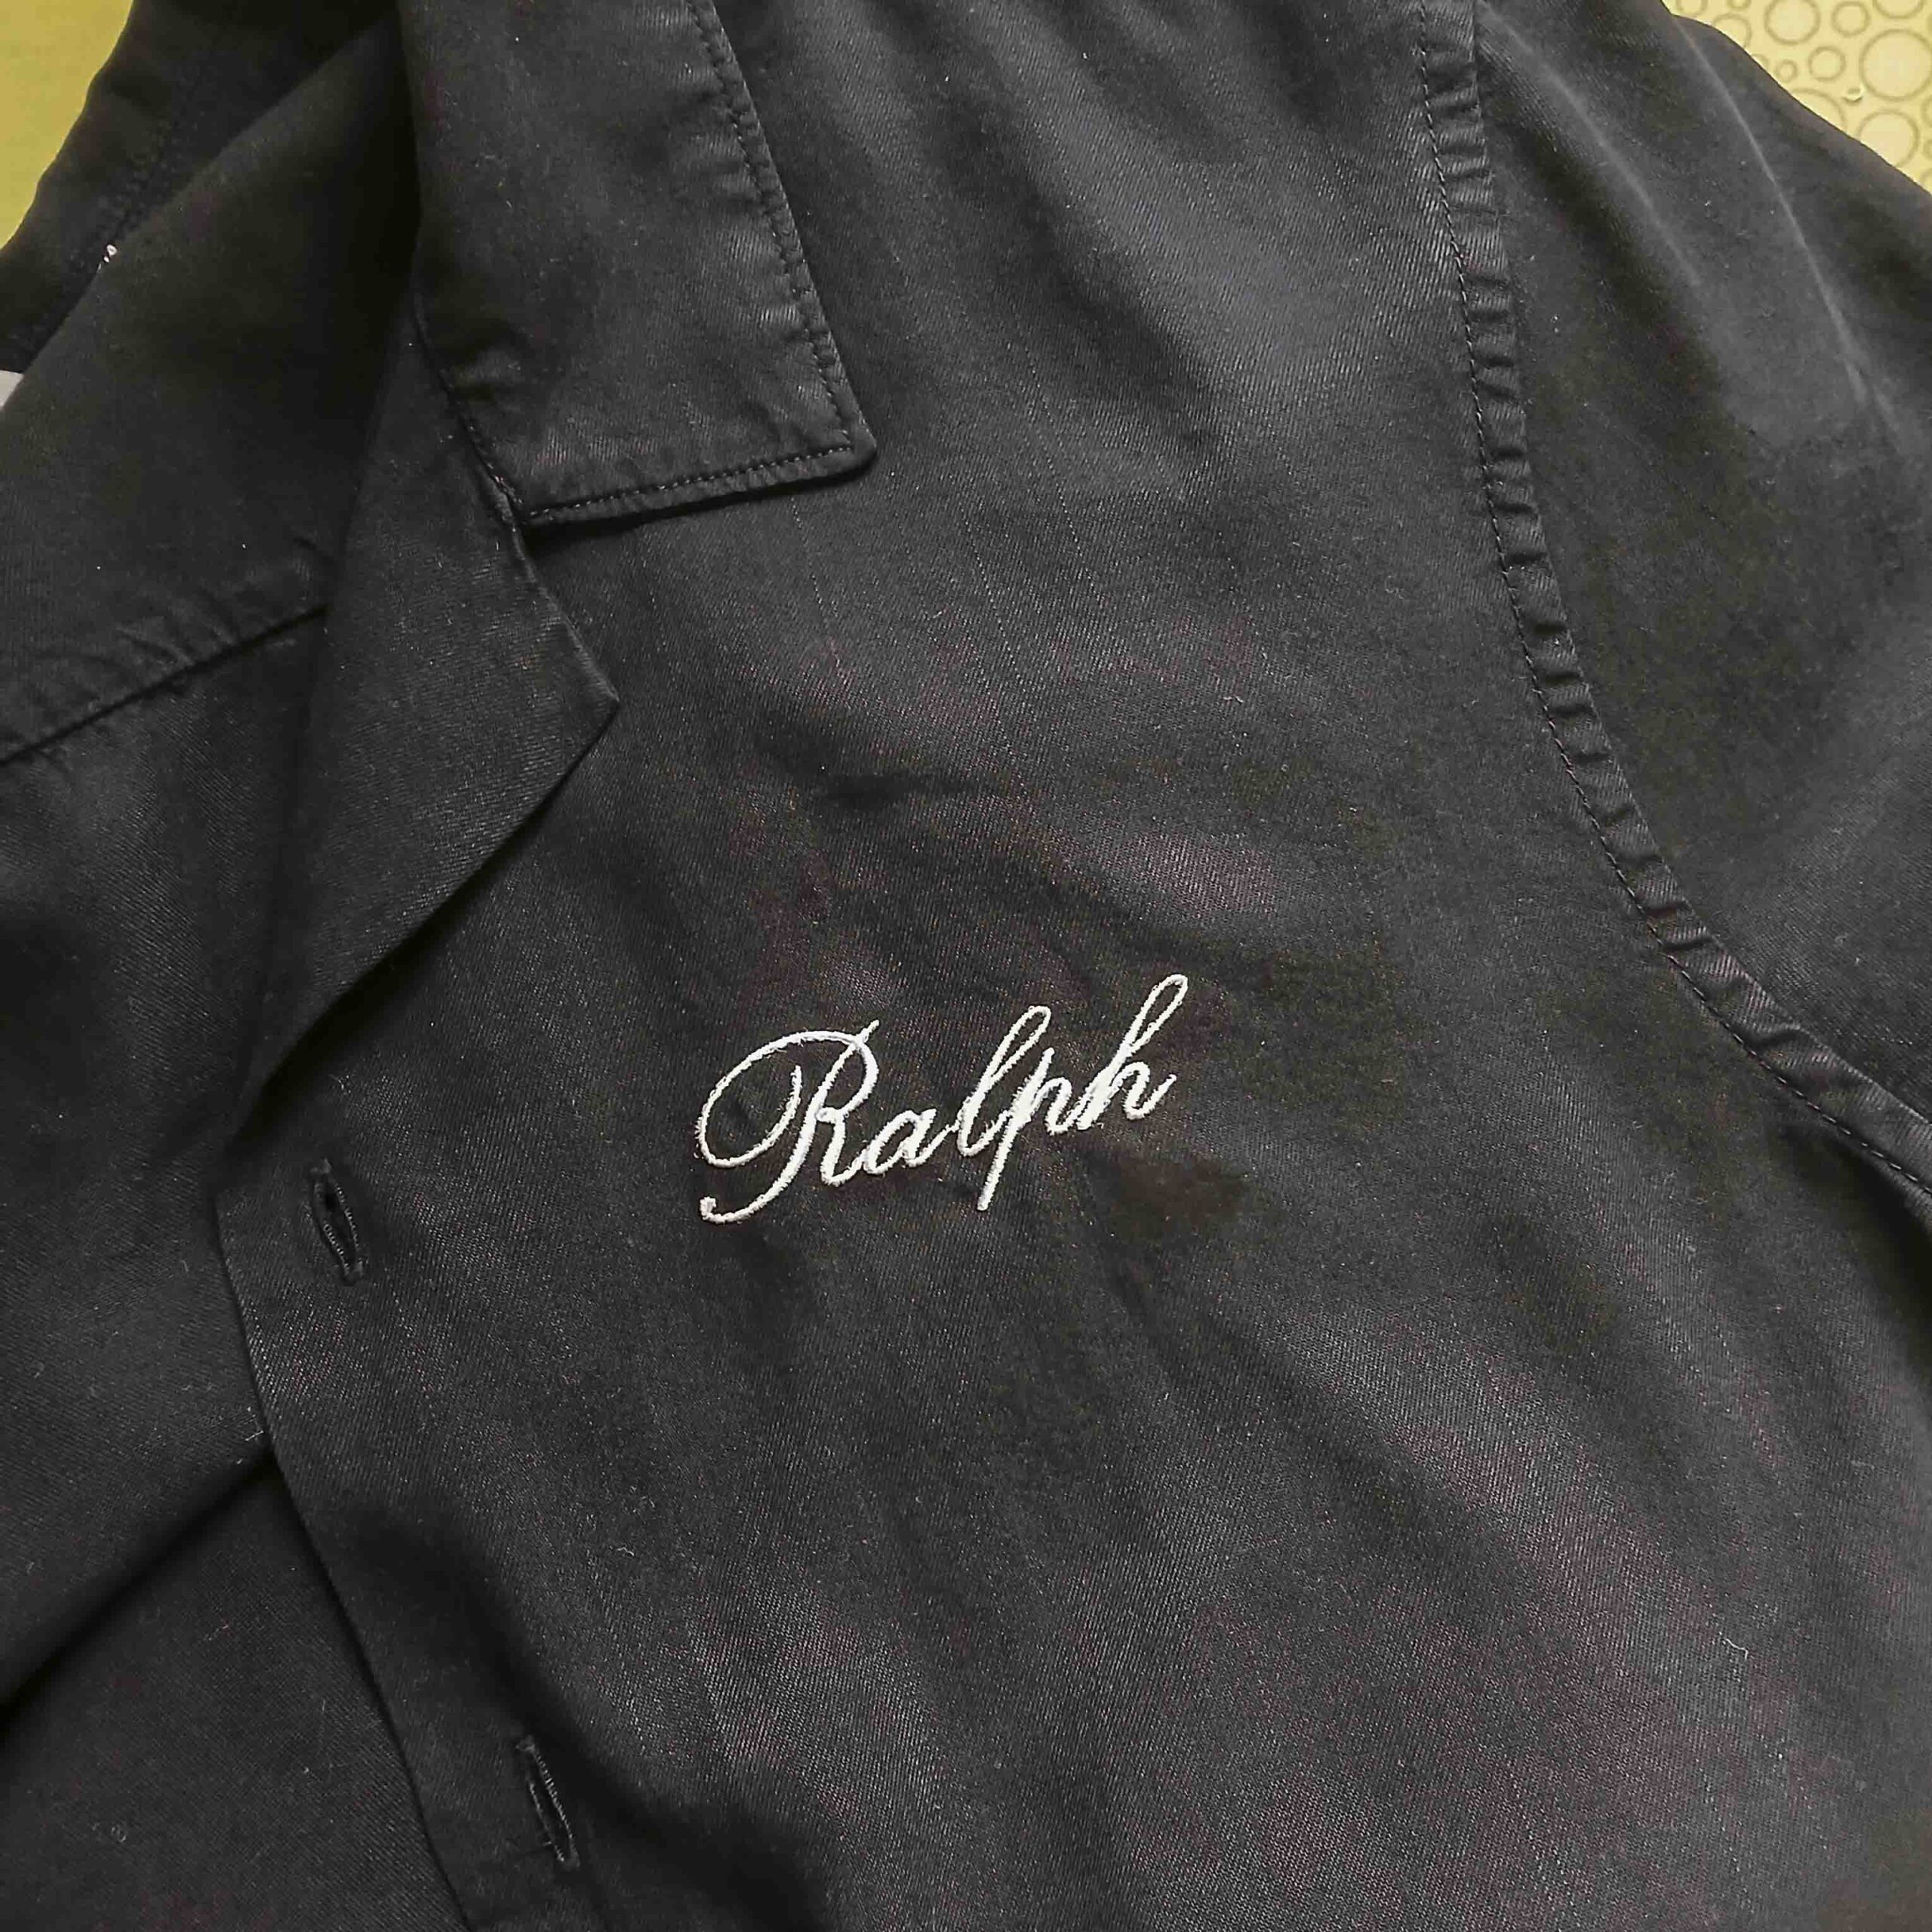 Personalised name embroidered on clothing Brighton